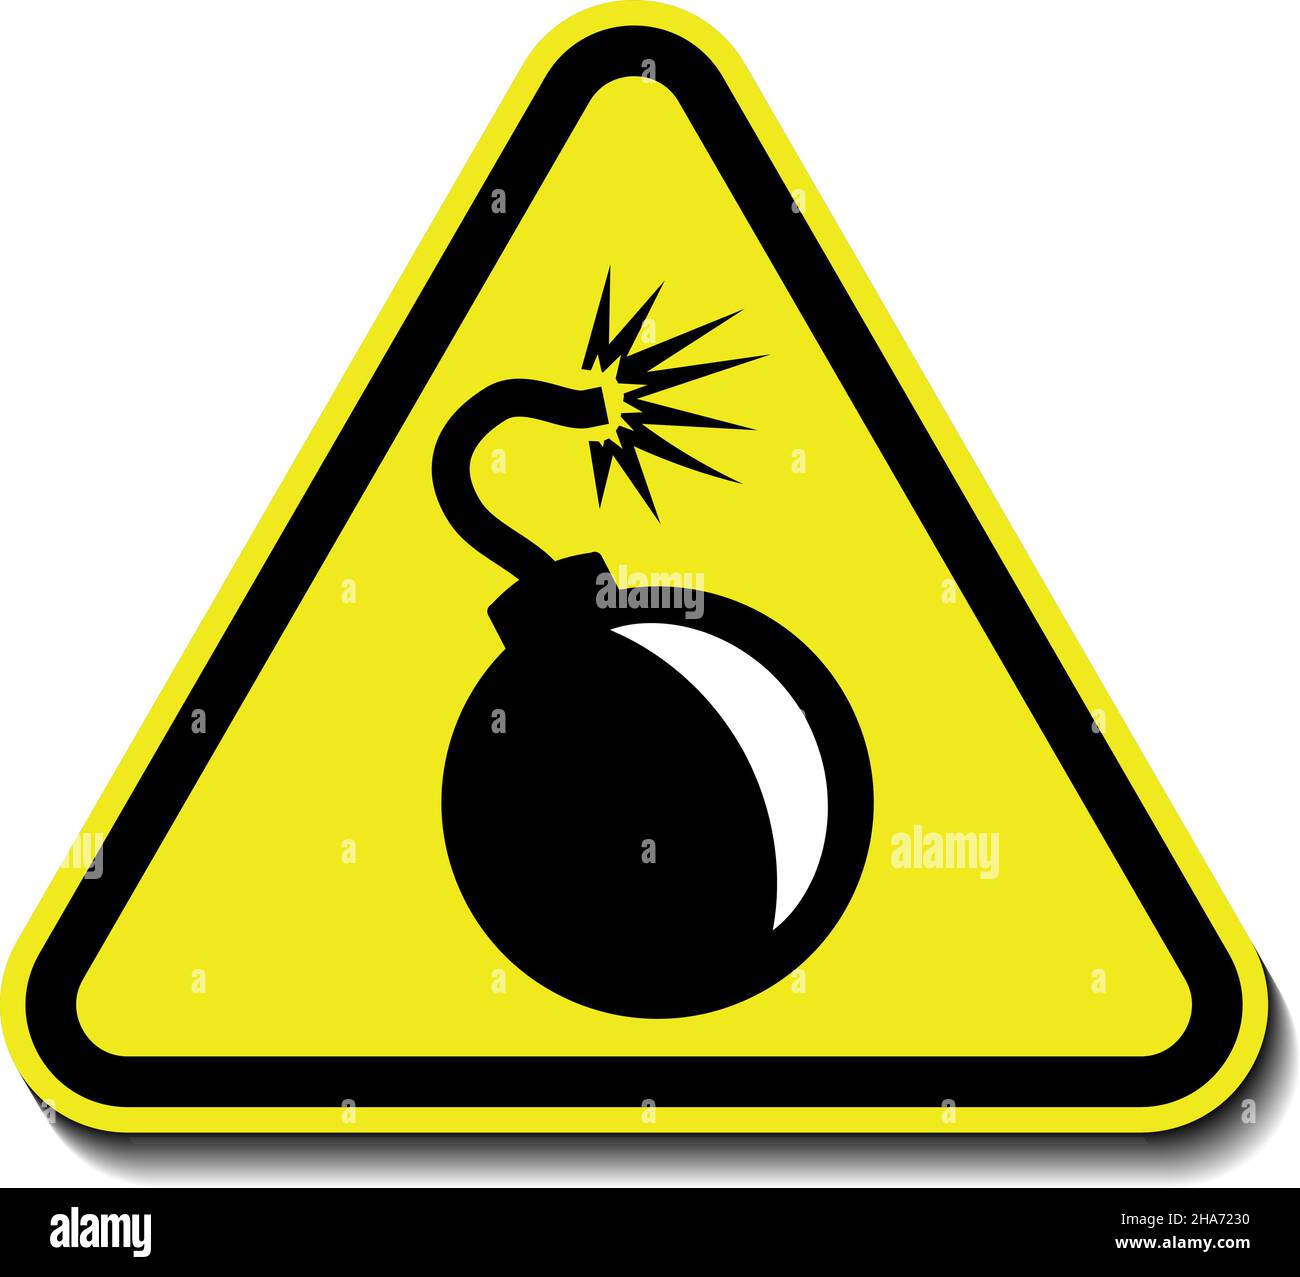 Bomb warning sign, Explotion Hazard. Yellow Triangle Caution Symbol, vector icon, isolated on white background Stock Vector